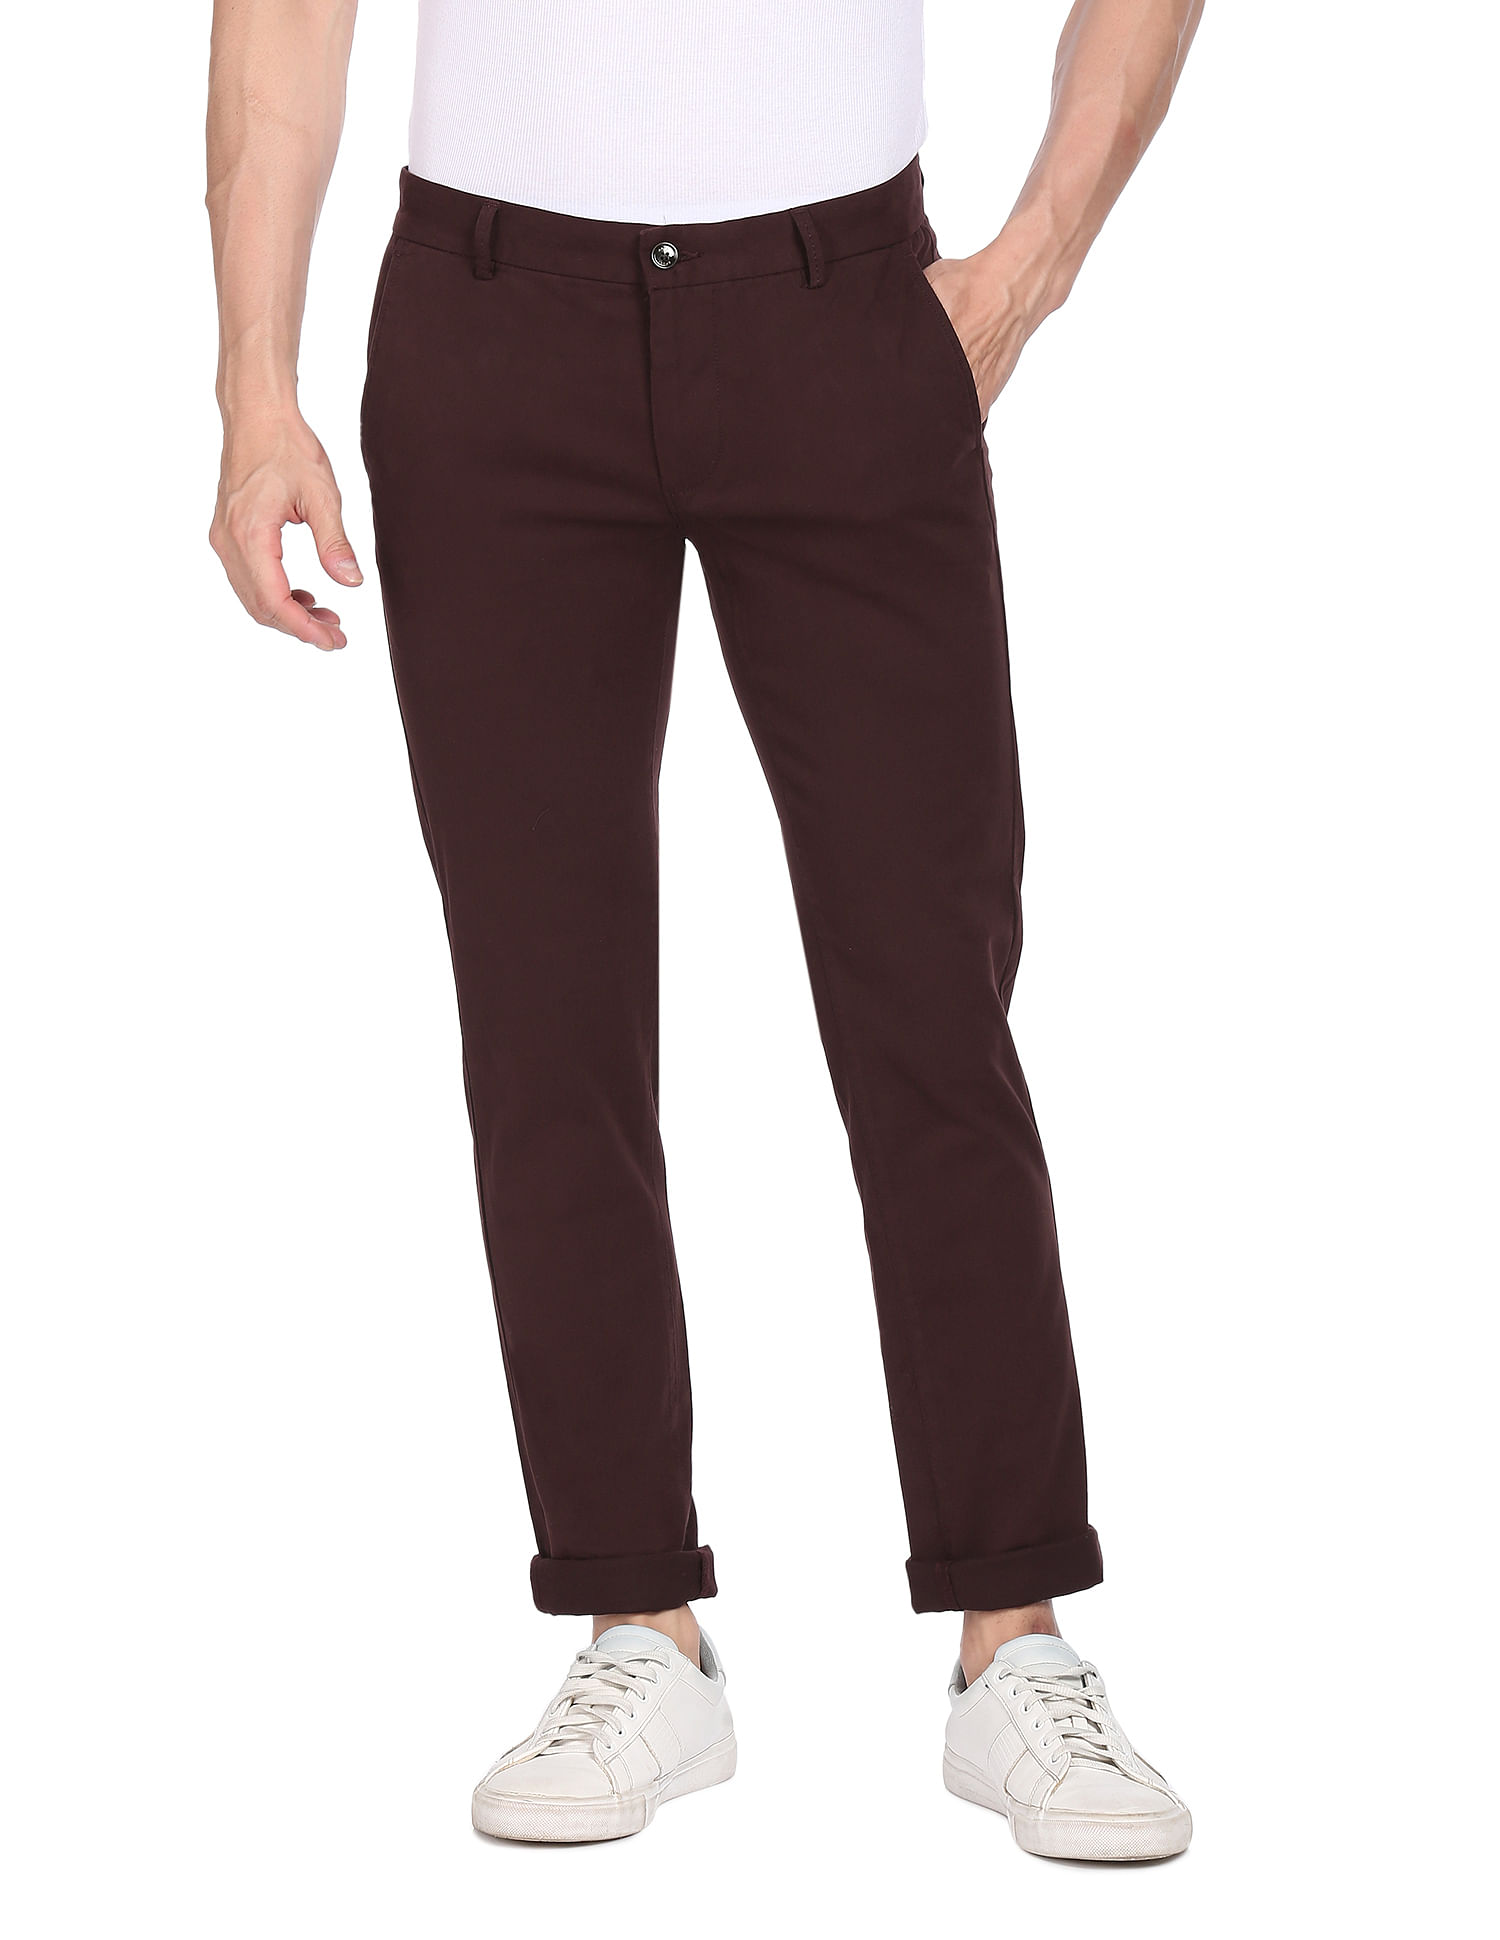 Buy Grey Trousers & Pants for Men by IVOC Online | Ajio.com